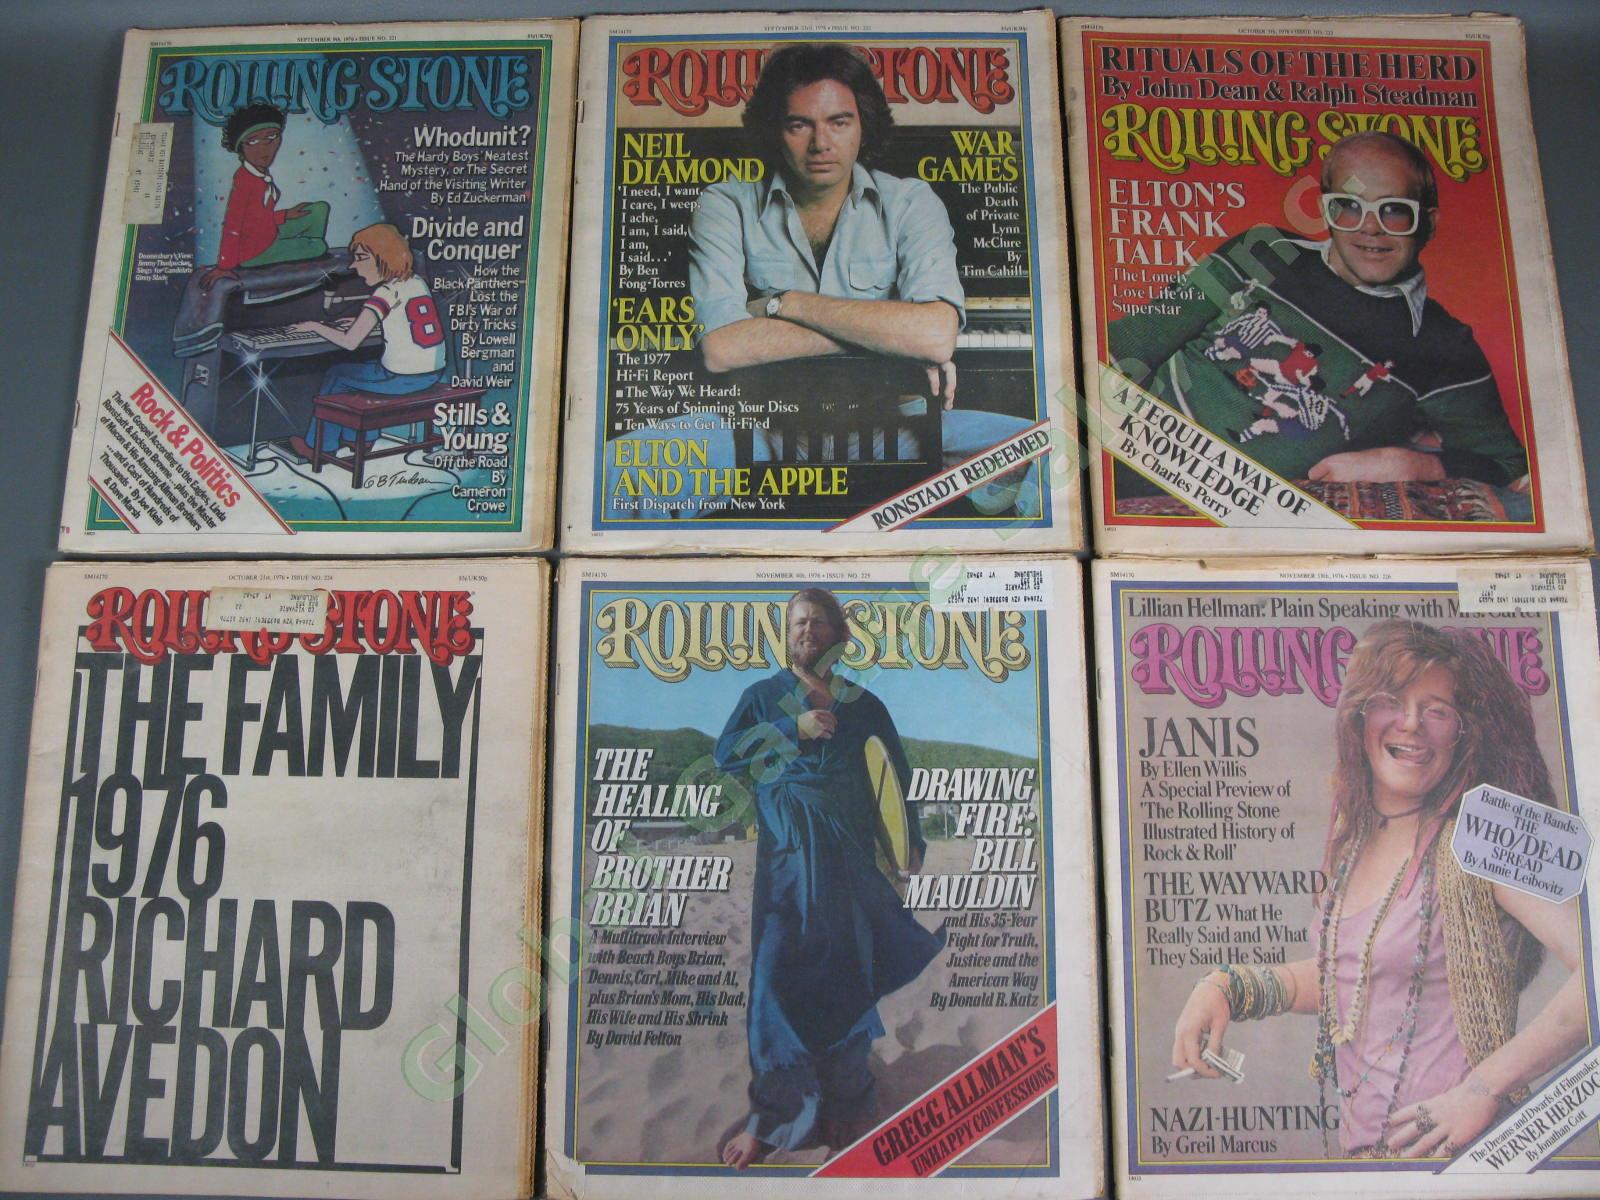 27 VINTAGE 1976 Rolling Stone Magazine SET Collection COMPLETE Full Year Run LOT 5